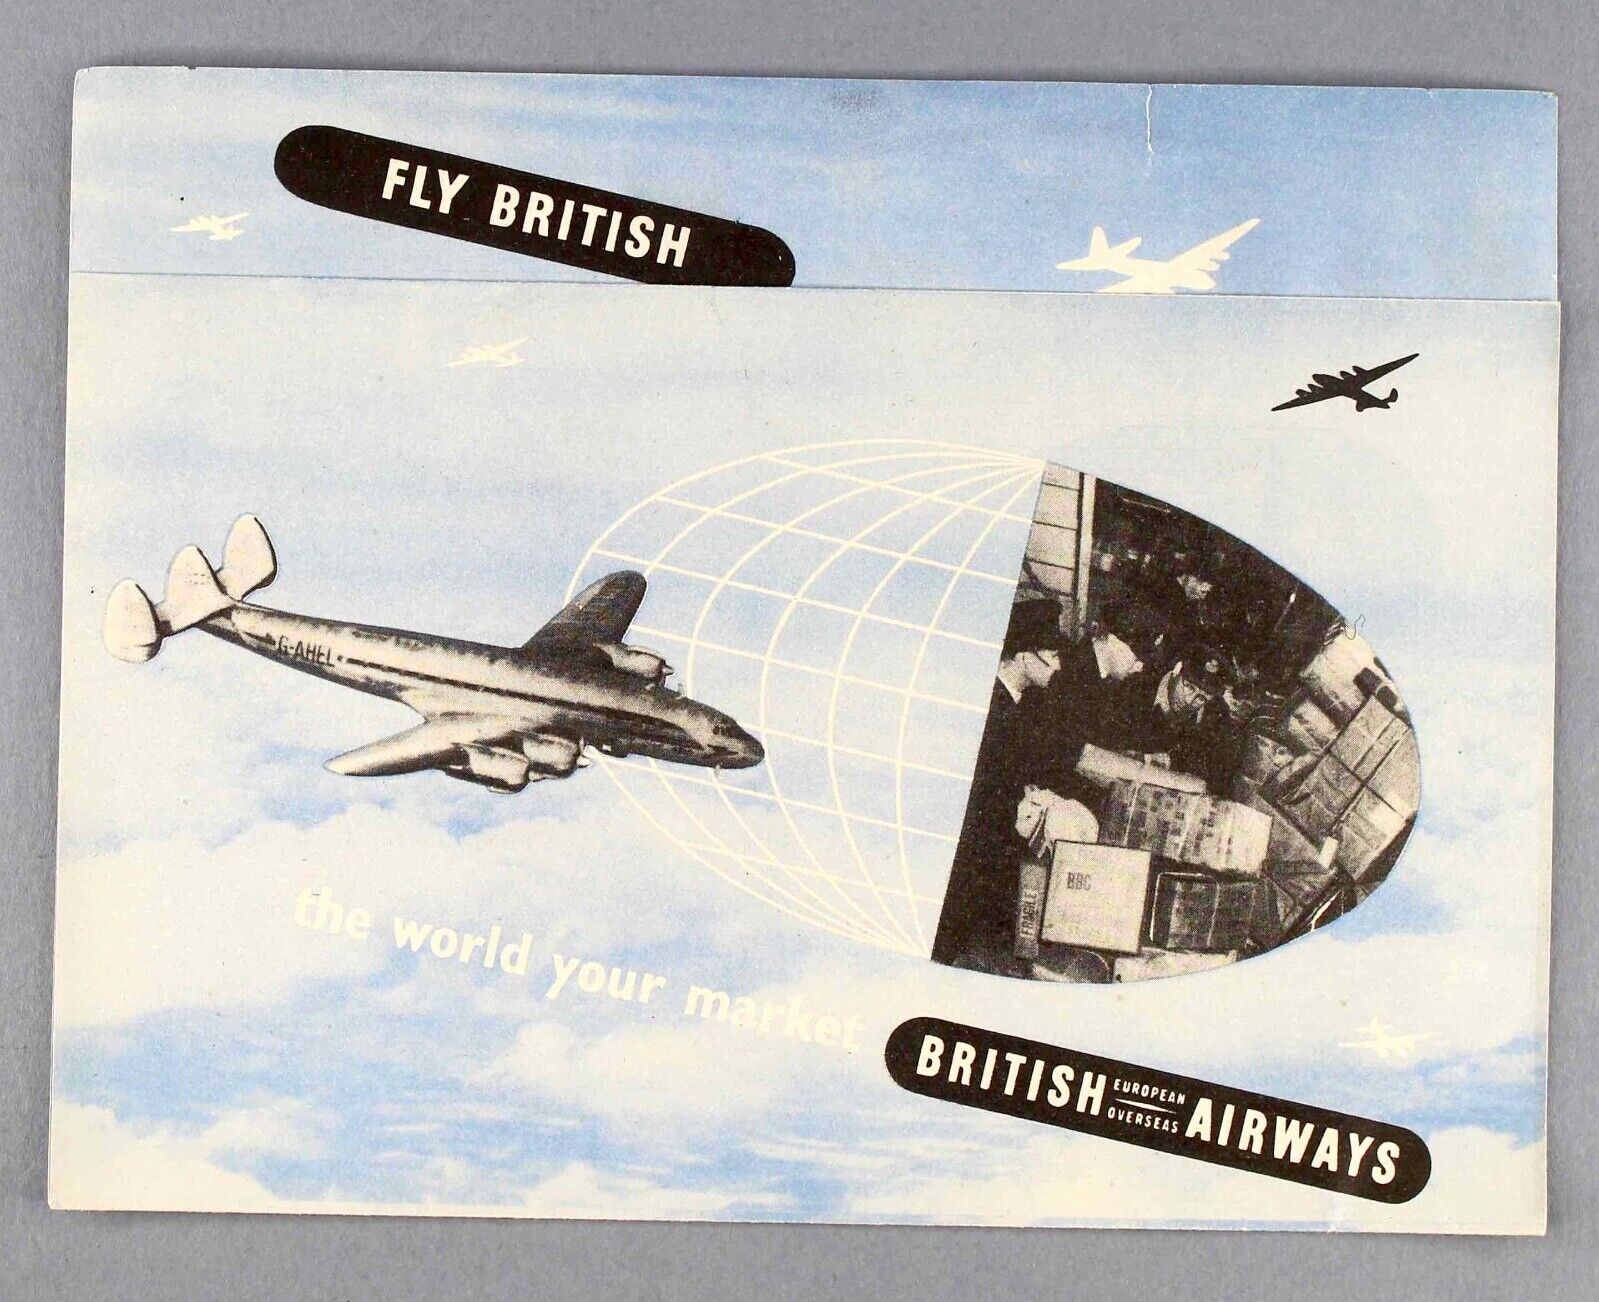 BOAC & BEA POST WAR VINTAGE AIRLINE BROCHURE LOCKHEED CONSTELLATION & ROUTE MAP 